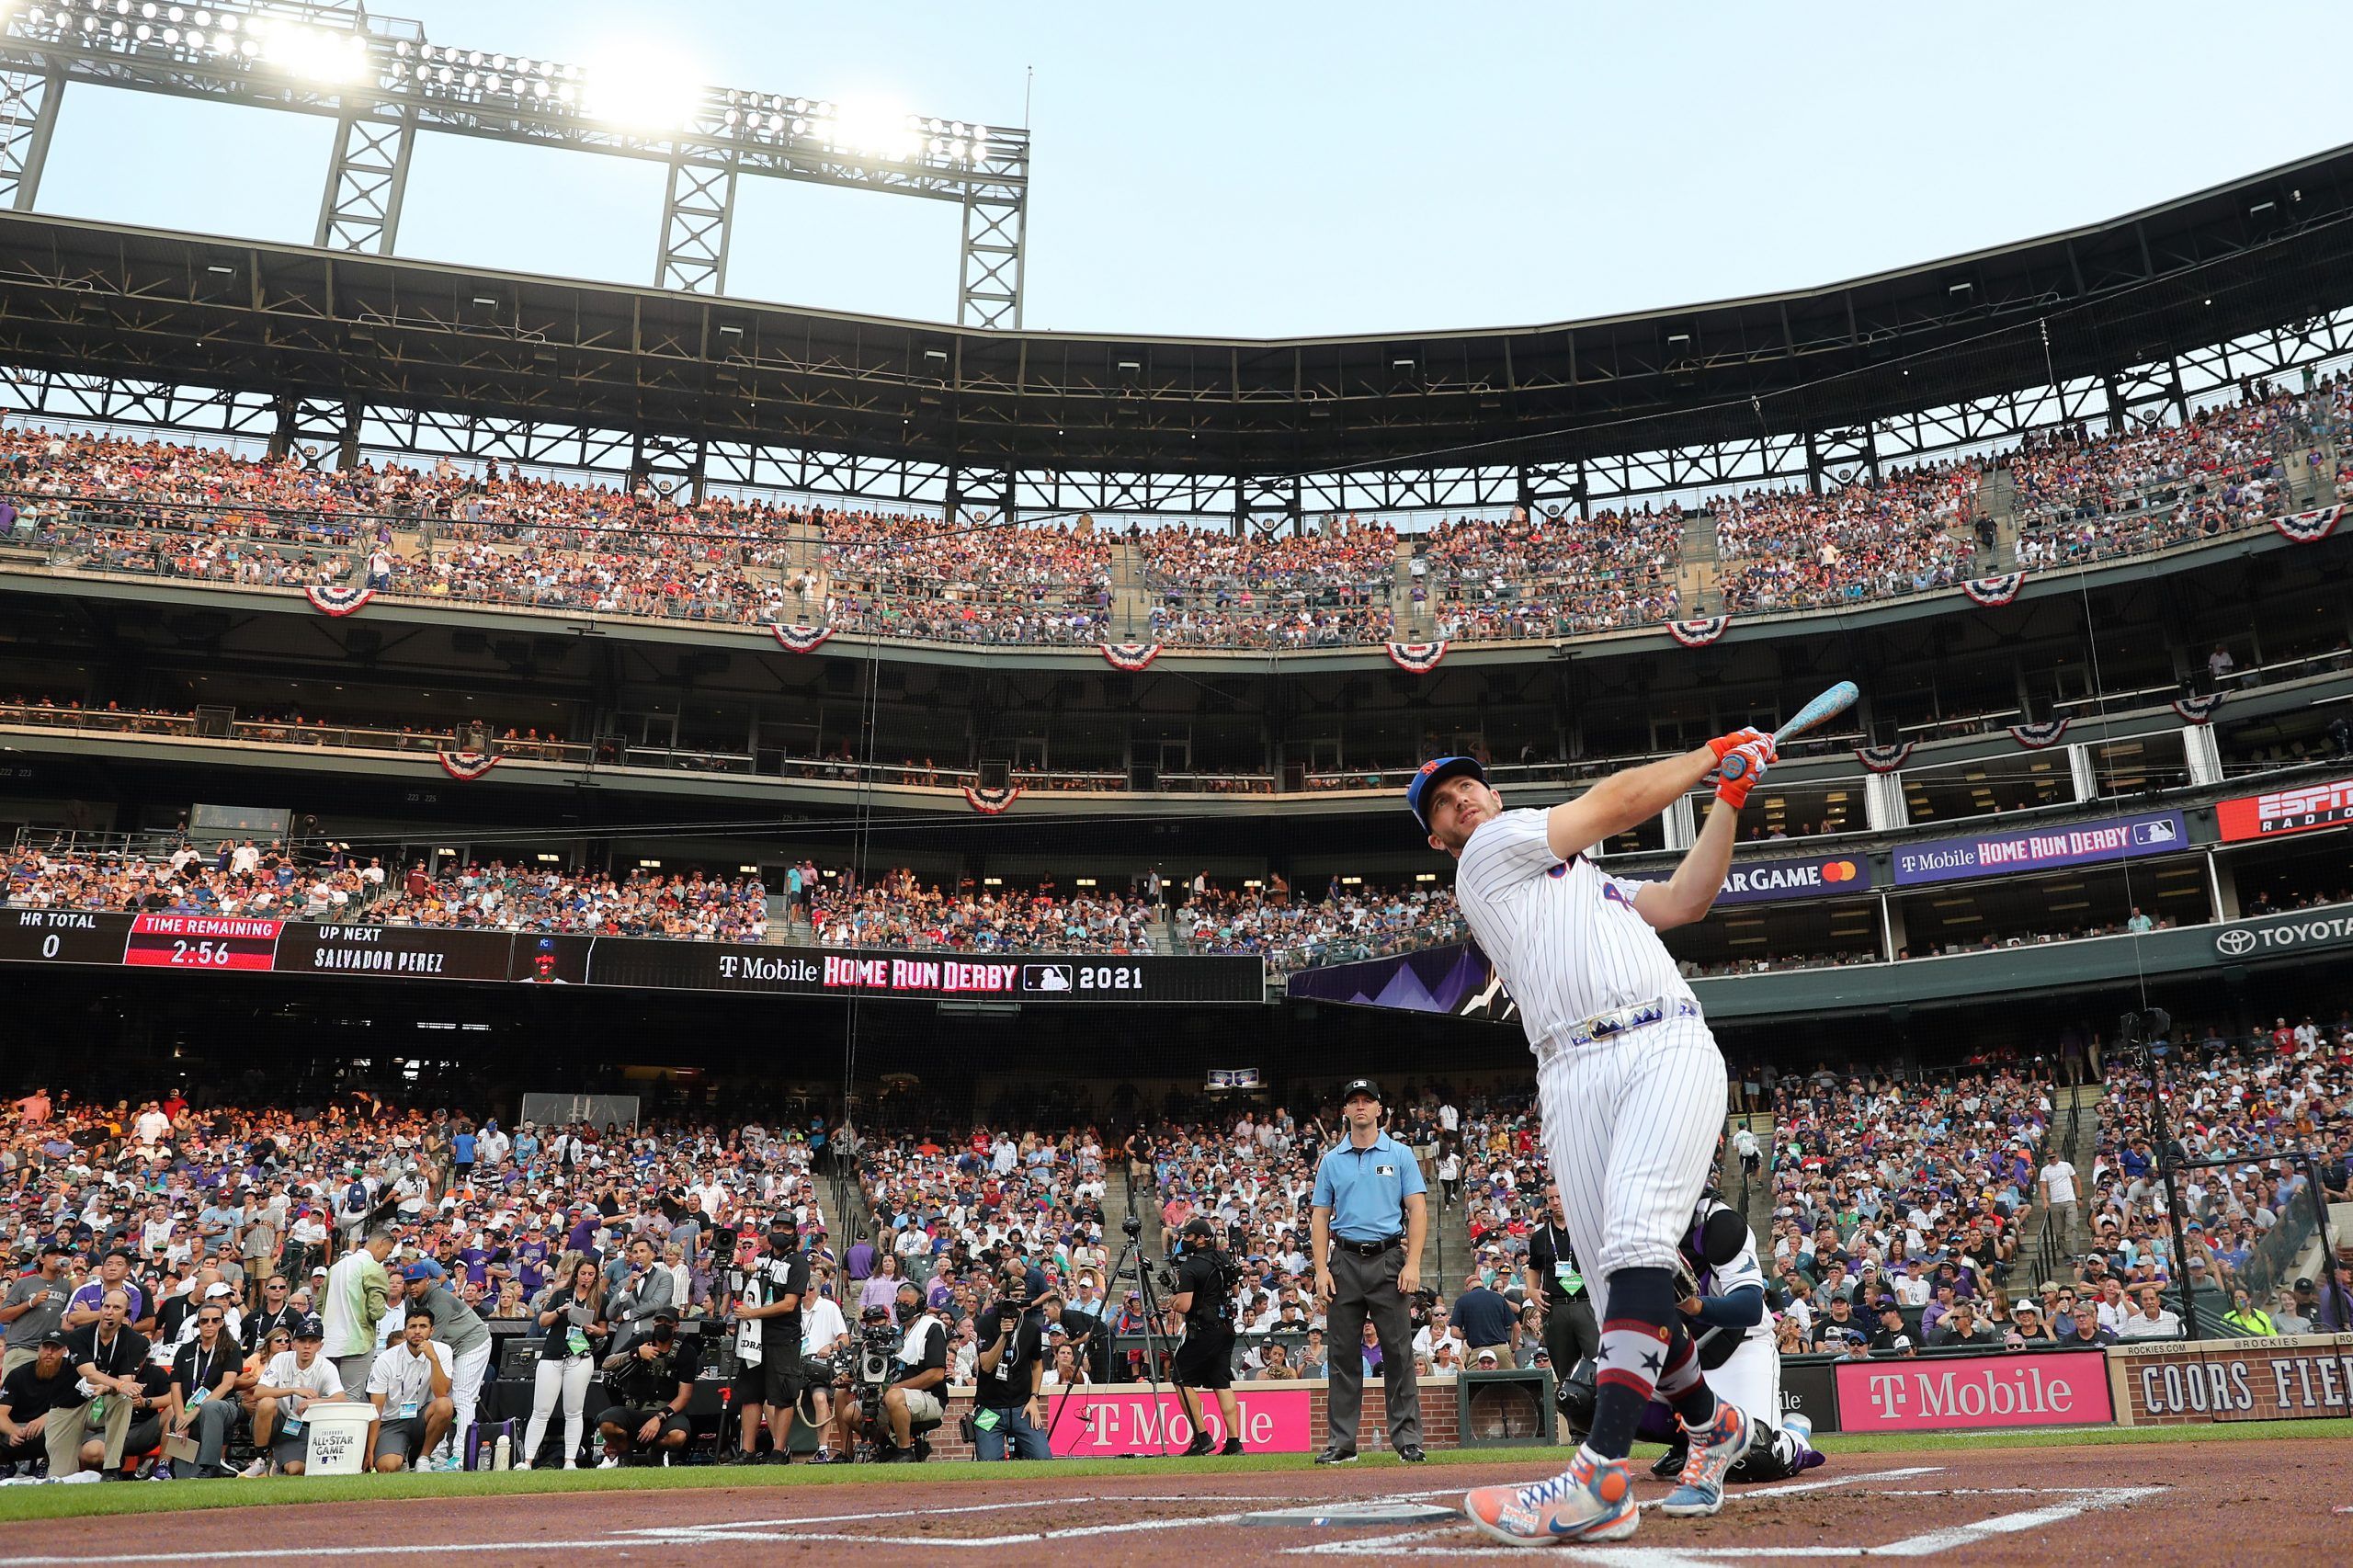 He's a Meathead in This Home Run Derby Capacity - MLB Analyst blown away  by Pete Alonso's never-ending desire for Home Run Derby crown